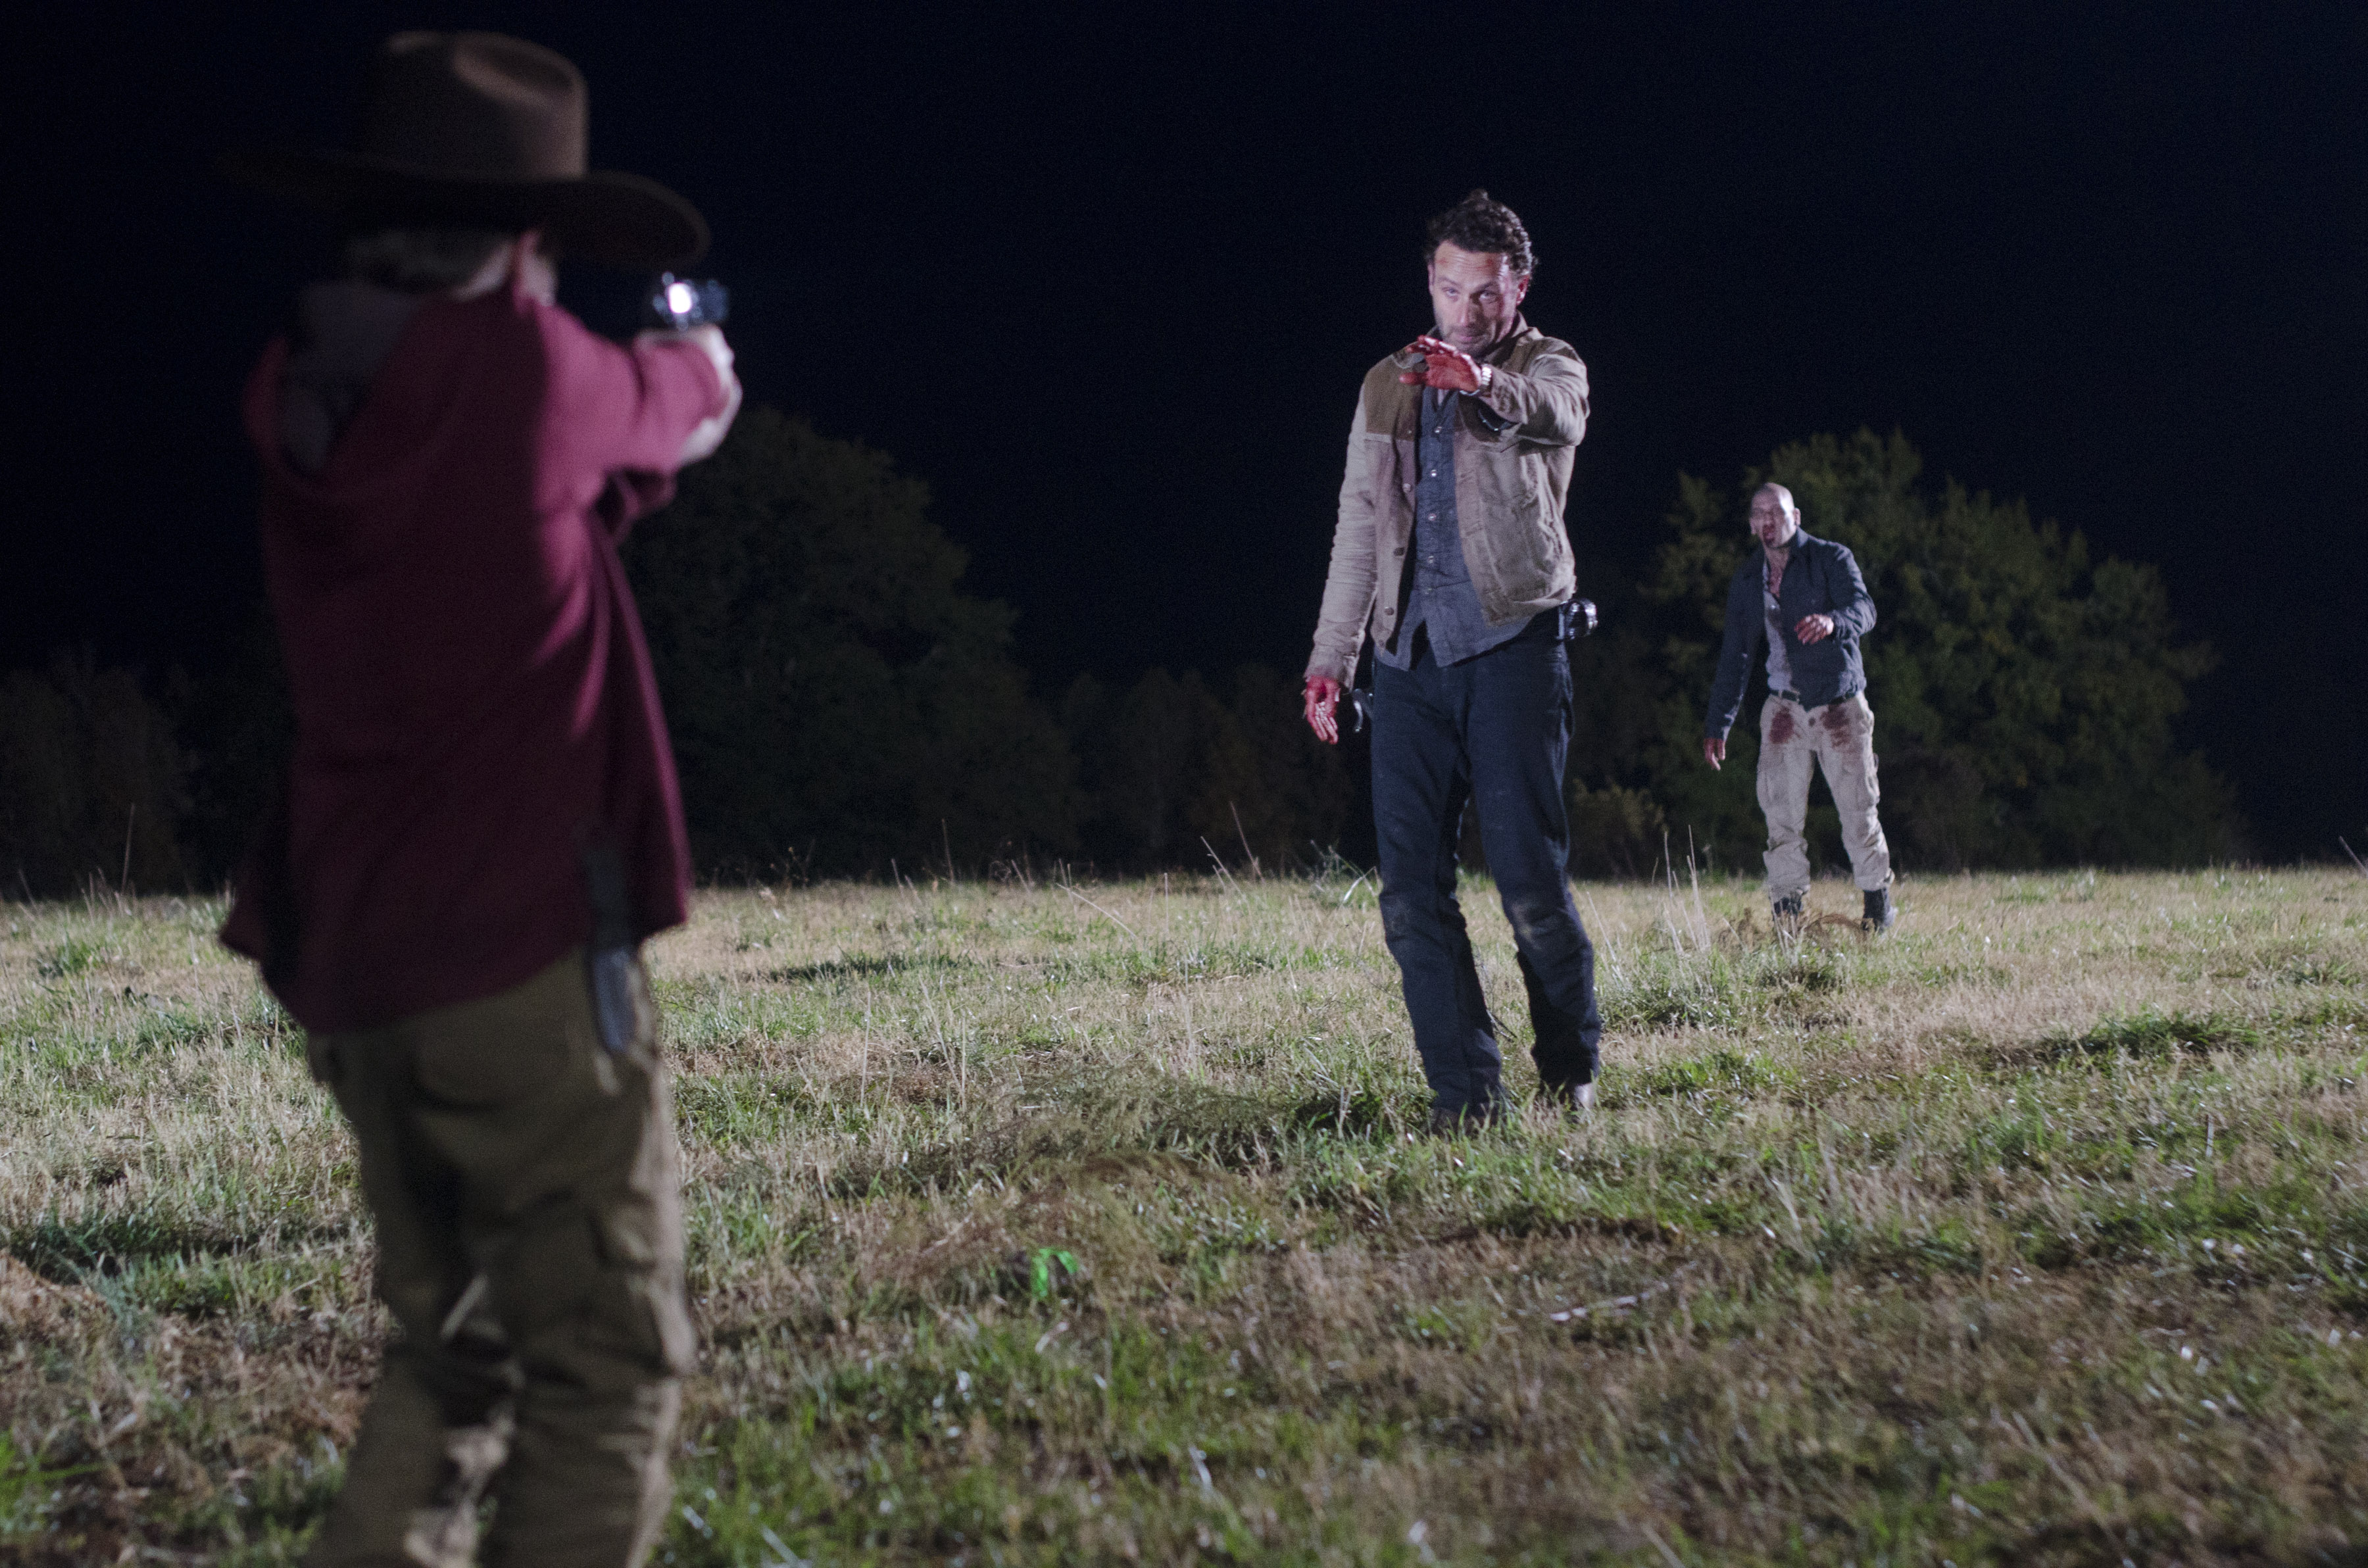 Carl Grimes (Chandler Riggs), Rick Grimes (Andrew Lincoln) and Shane Walsh (Jon Bernthal) - The Walking Dead - Season 2, Episode 12 - Photo Credit: Gene Page/AMC